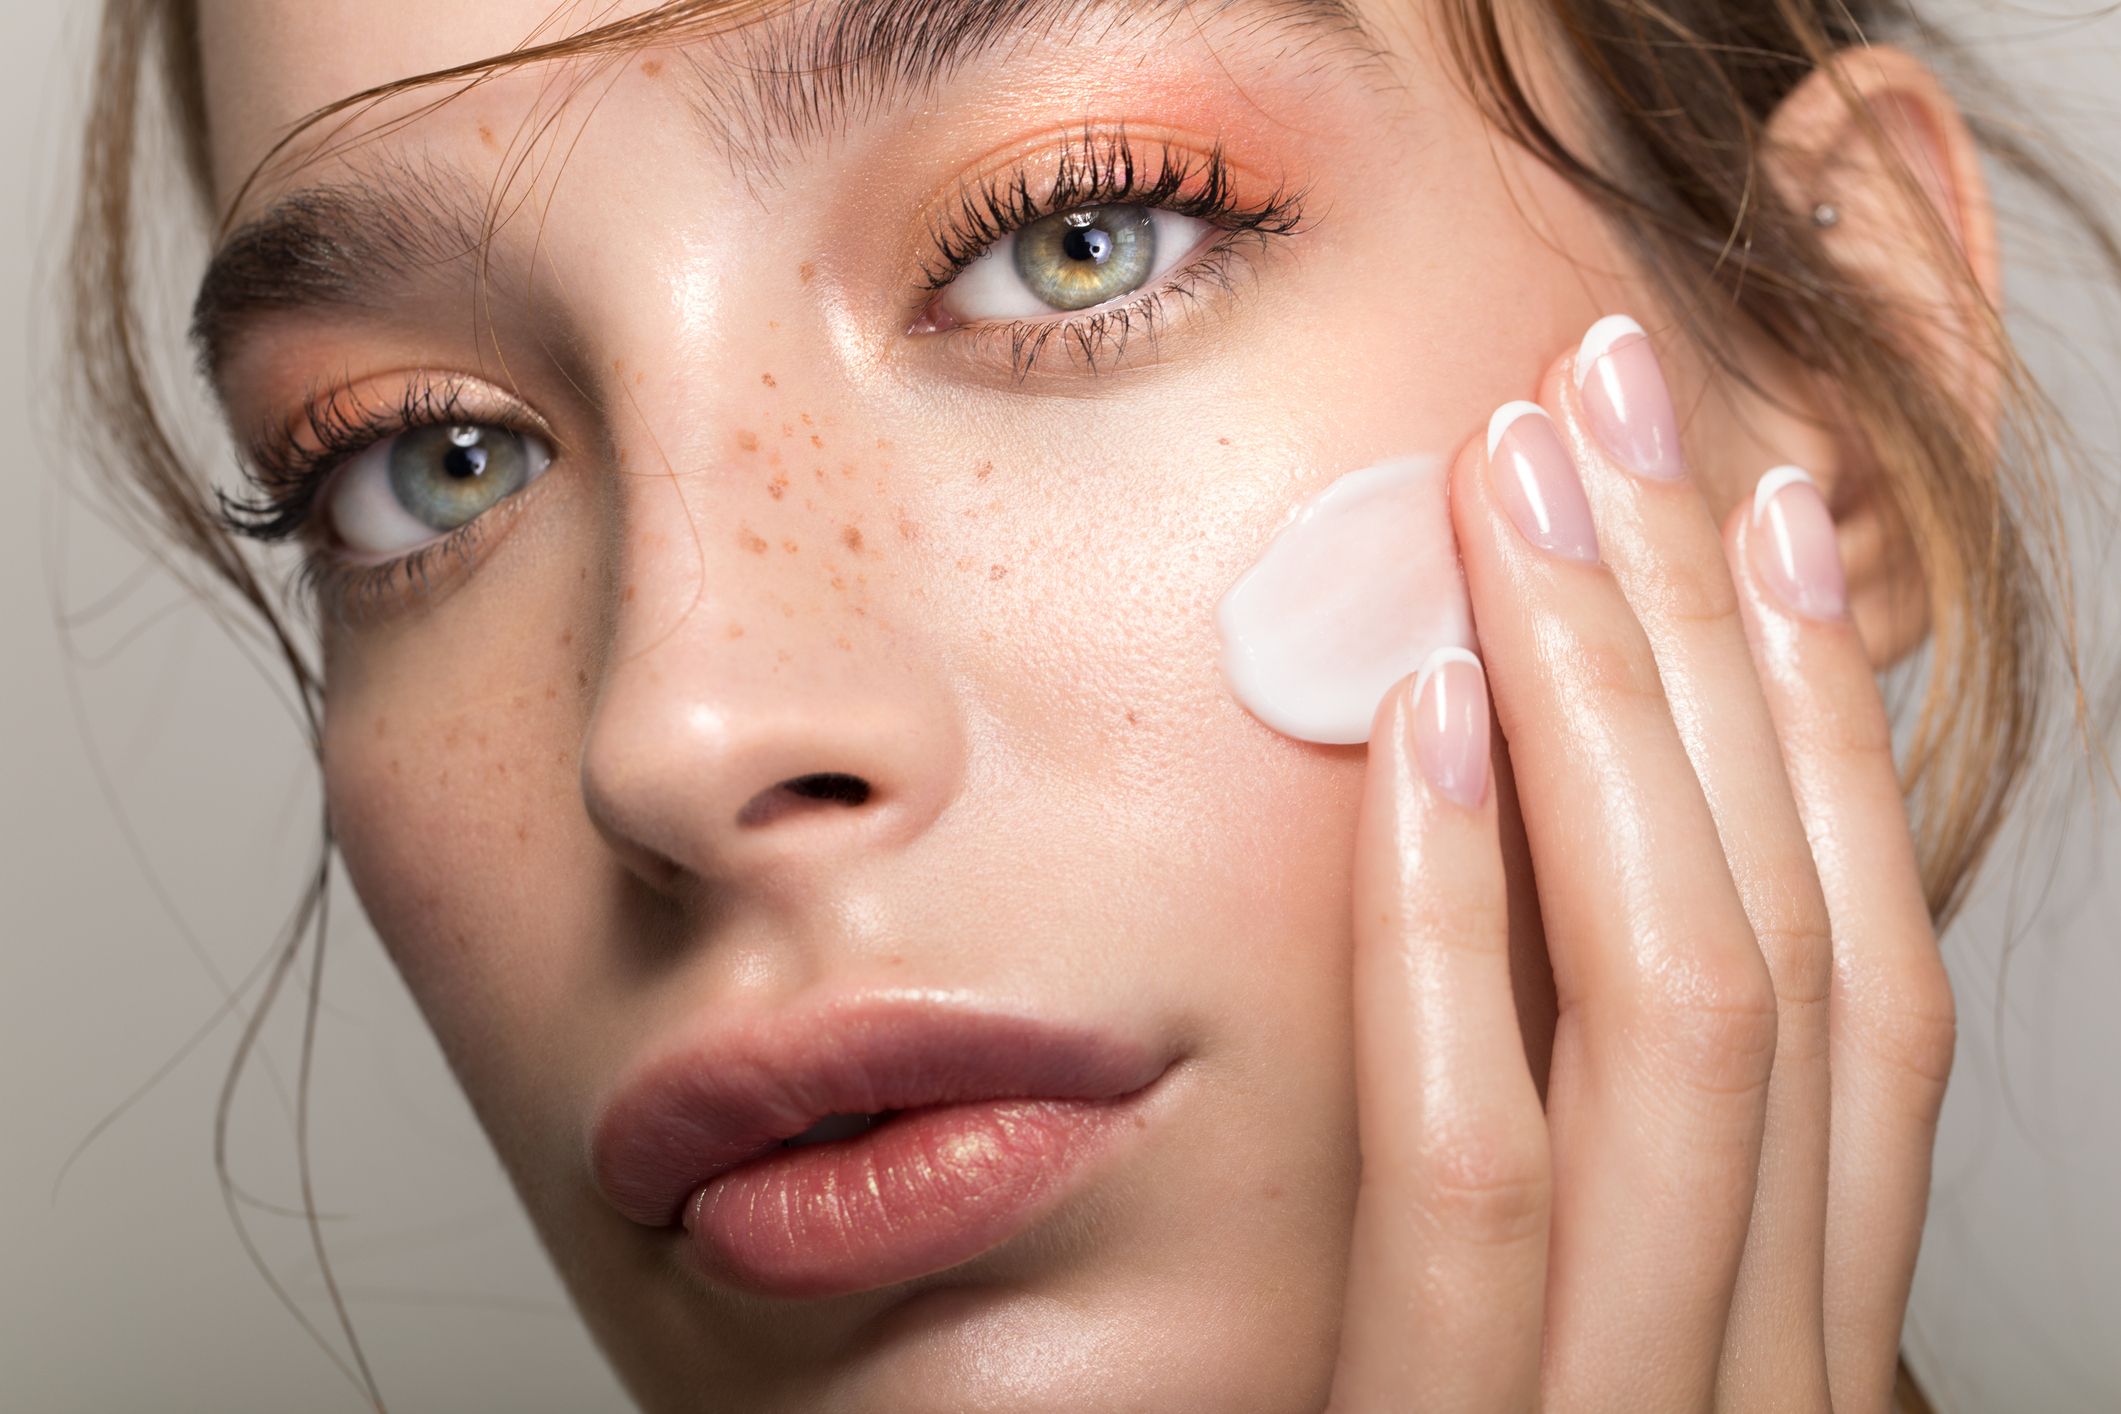 How to get clear skin: Fast, naturally, and at home